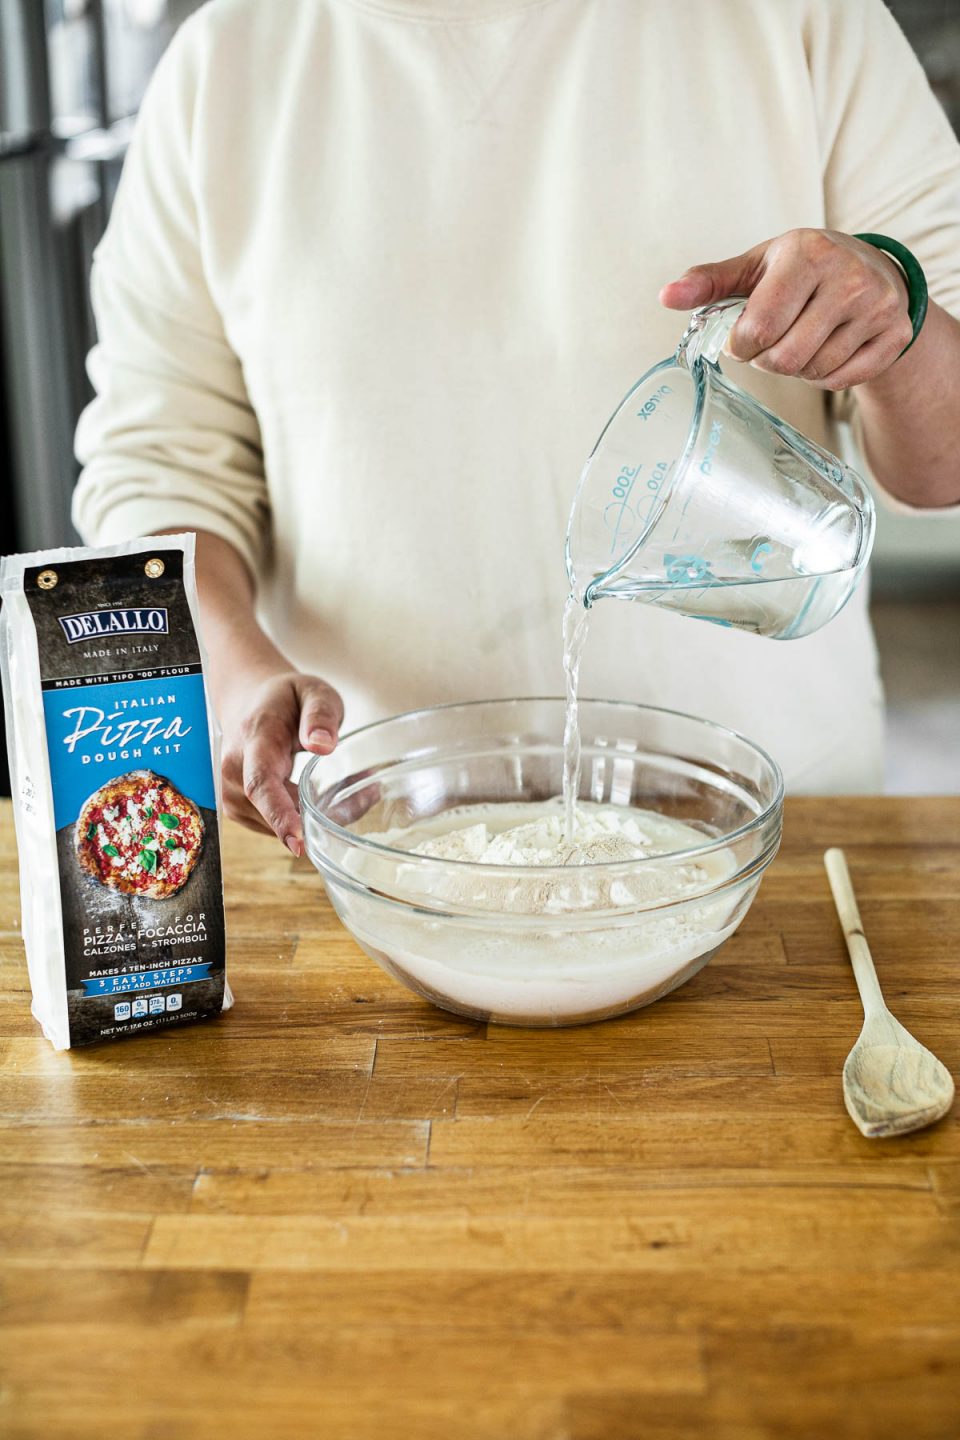 Mixing DeLallo Pizza Dough Kit: Jess, shown in a white sweatshirt, stands behind a butcher block counter, pouring water into a mixing bowl with flour in it. Sitting next to the bowl on the counter are a wooden spoon & a package of DeLallo Pizza Dough Kit.